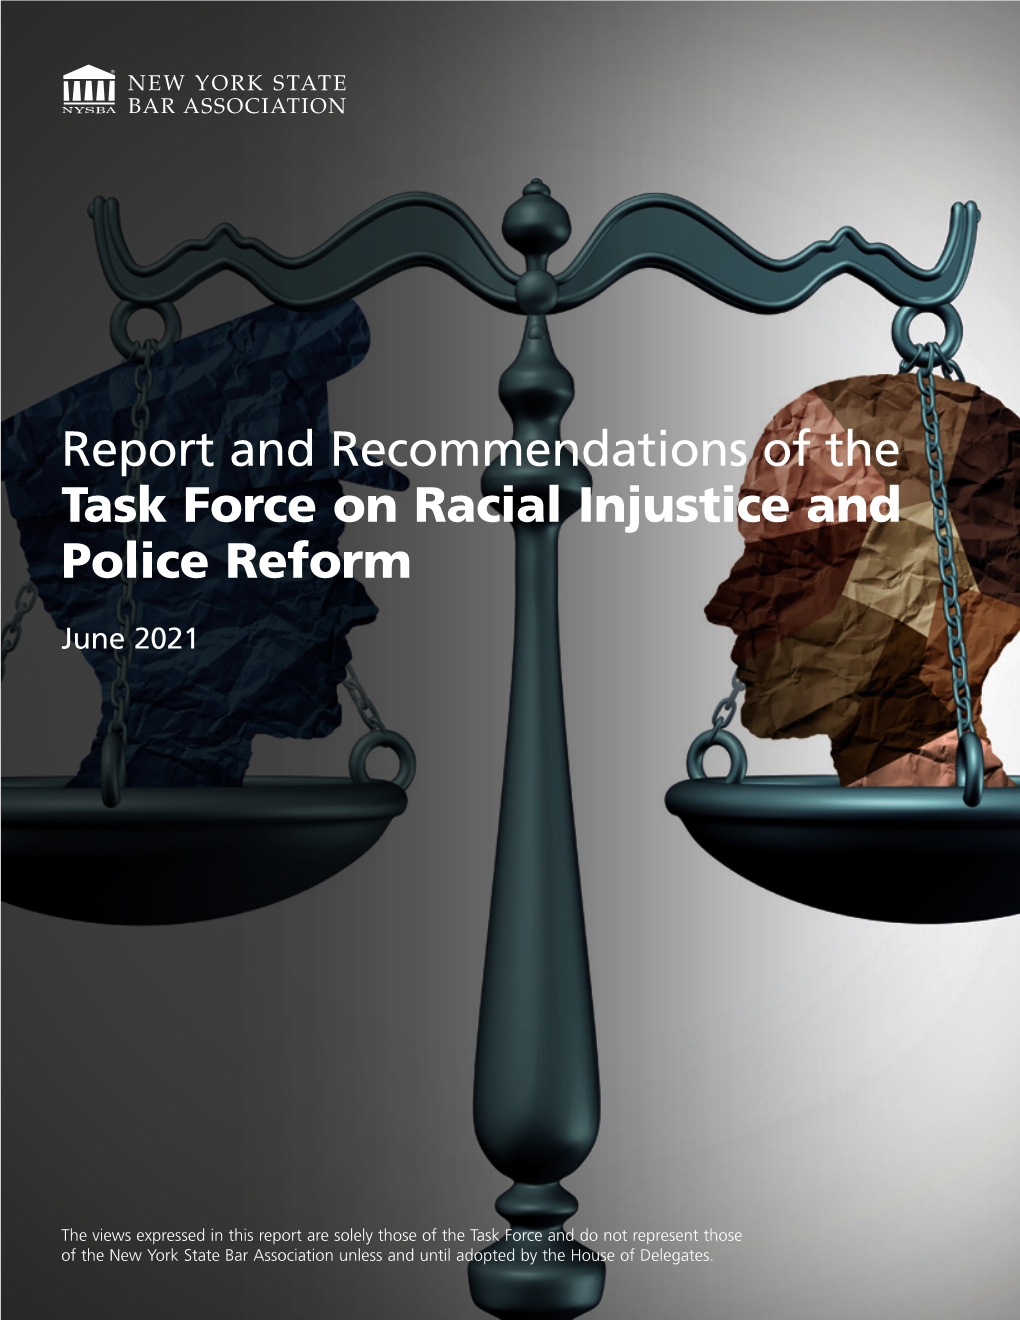 Report and Recommendations of the Task Force on Racial Injustice and Police Reform